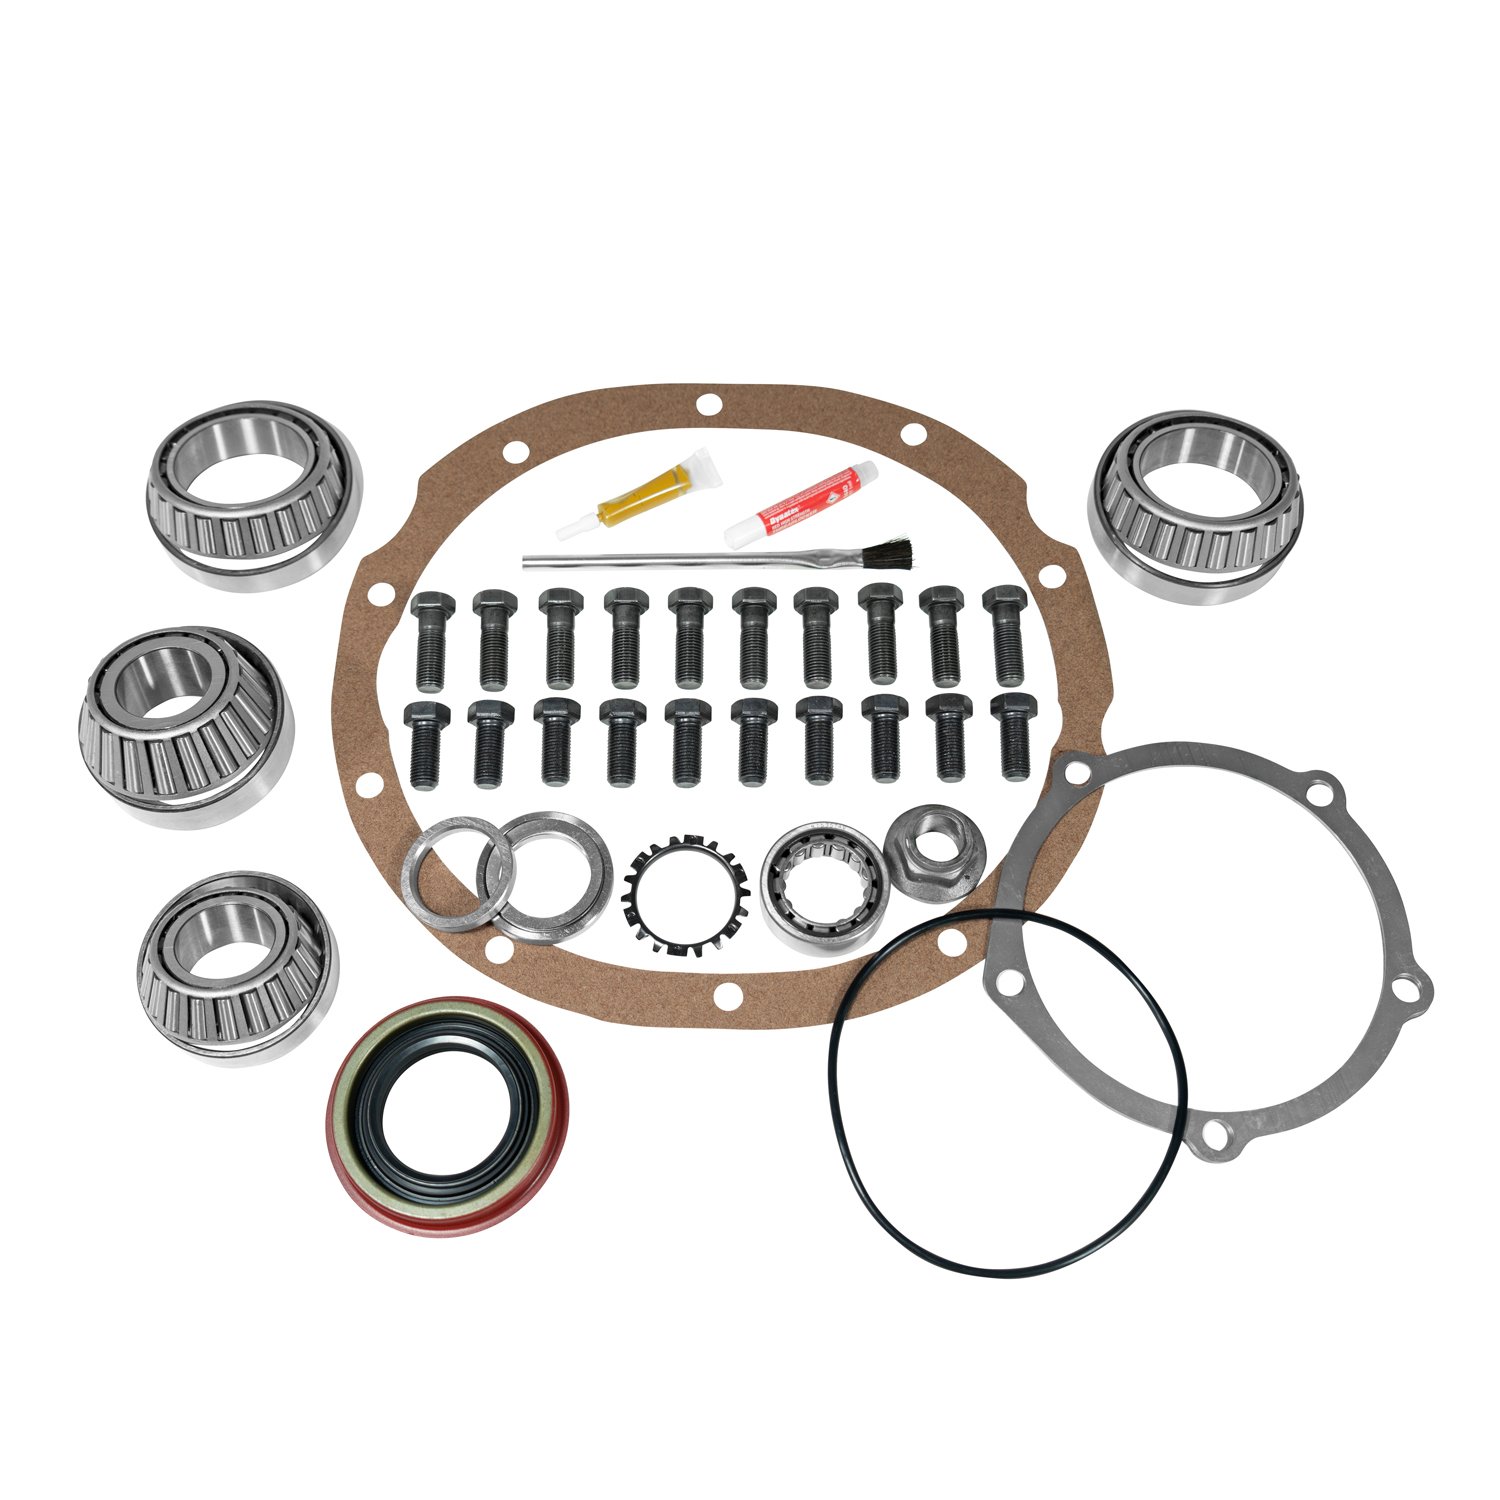 Master Overhaul Kit For Ford Daytona 9 in. Lm102910 Differential